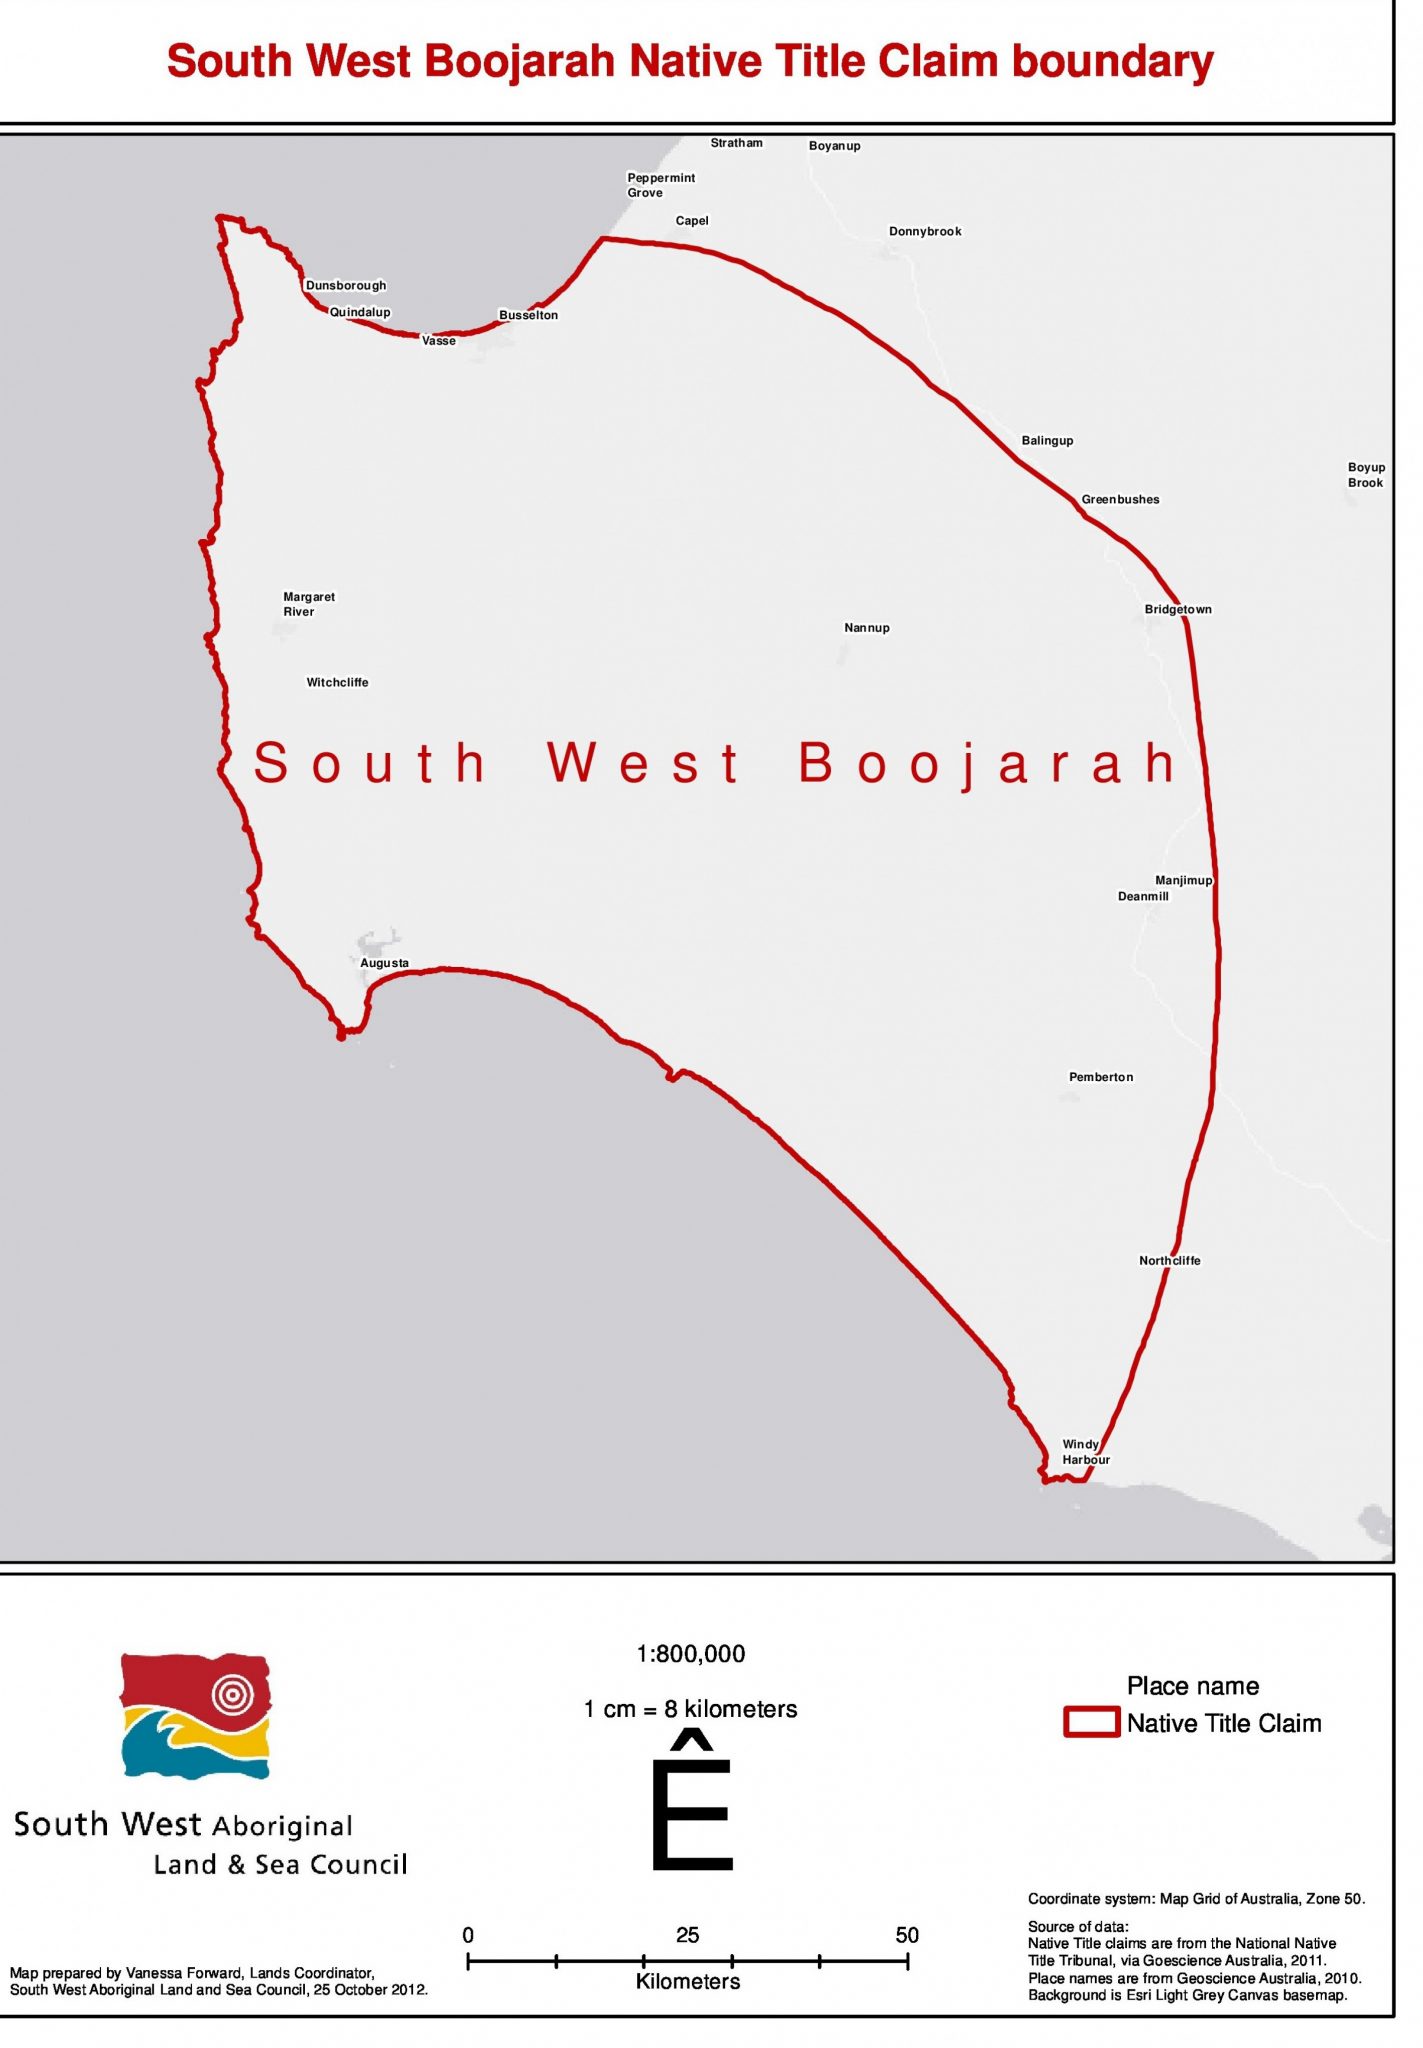 South West Boojarah Native Titile Claim Boundary. Courtesy SWALSC